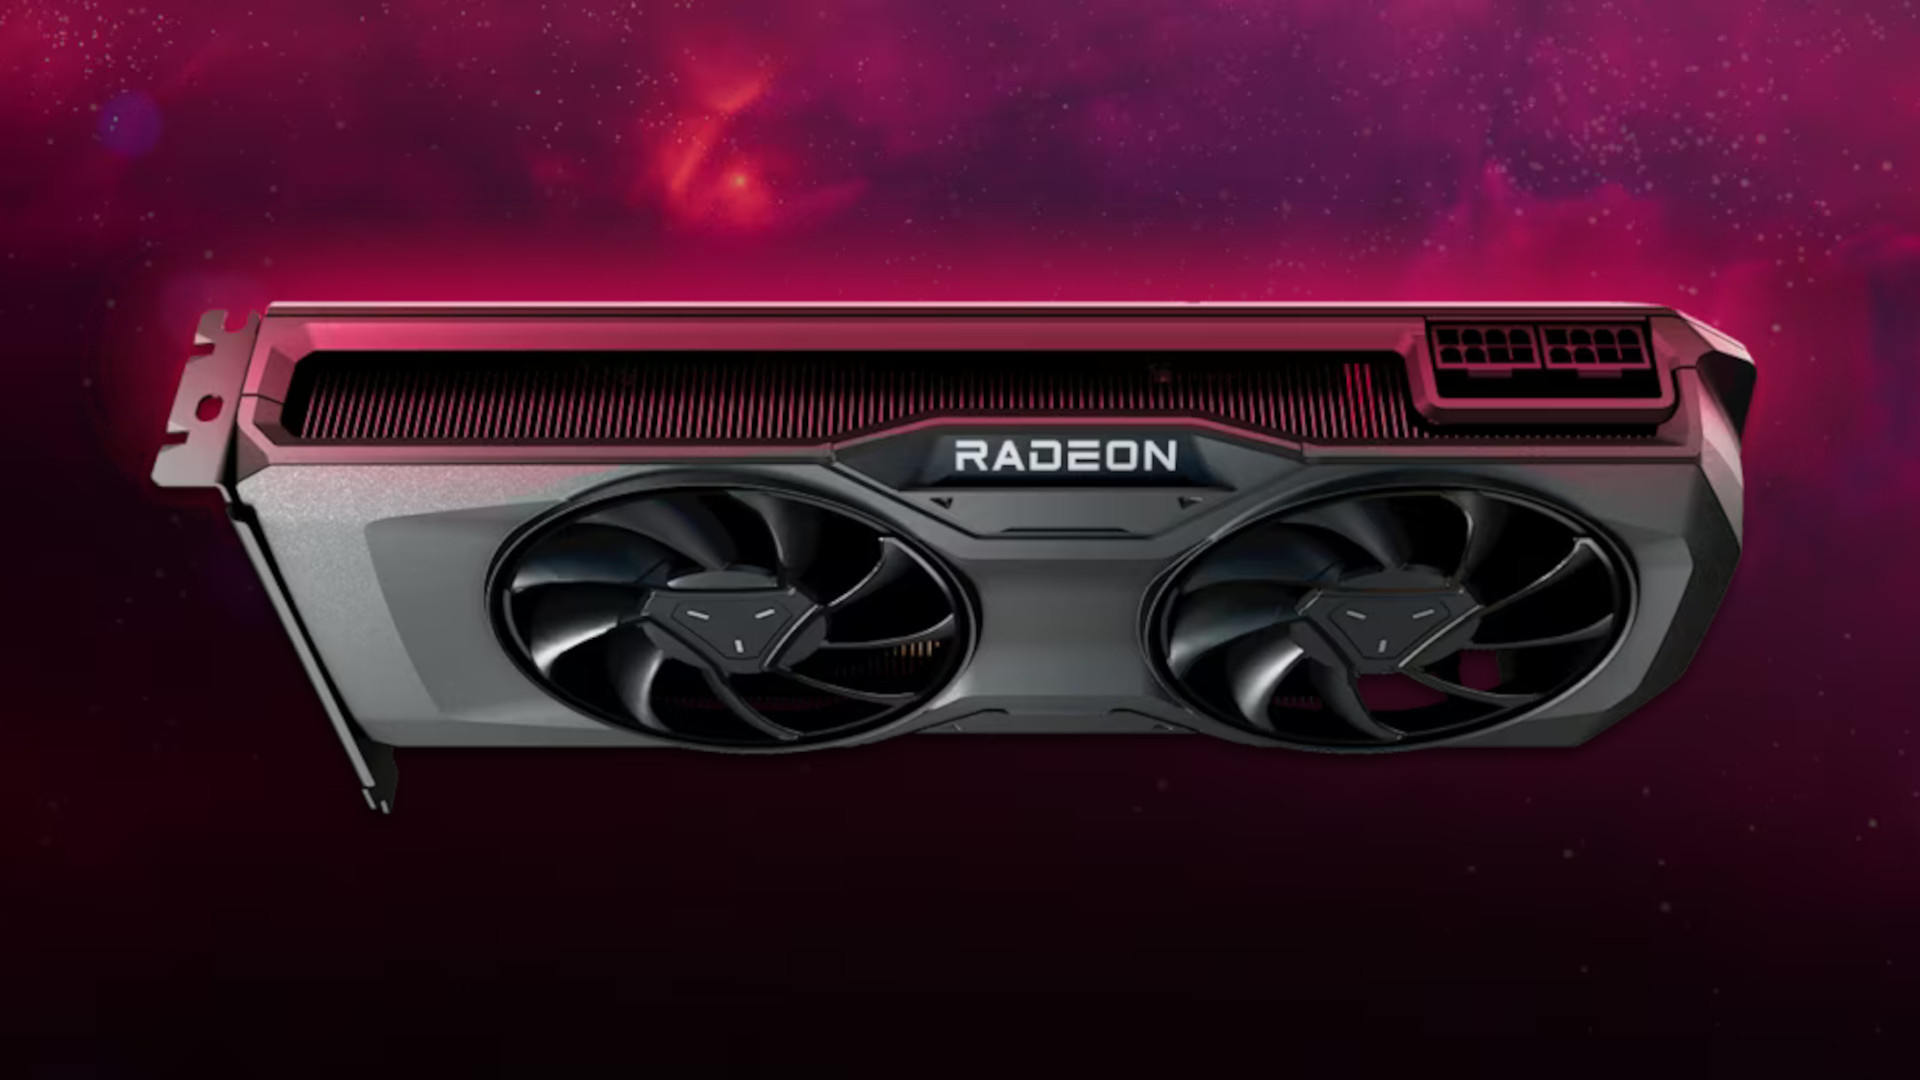 AMD Radeon RX 7700 XT specs: A reference card for the AMD Radeon RX 7000 series floats against a dark-red nebula